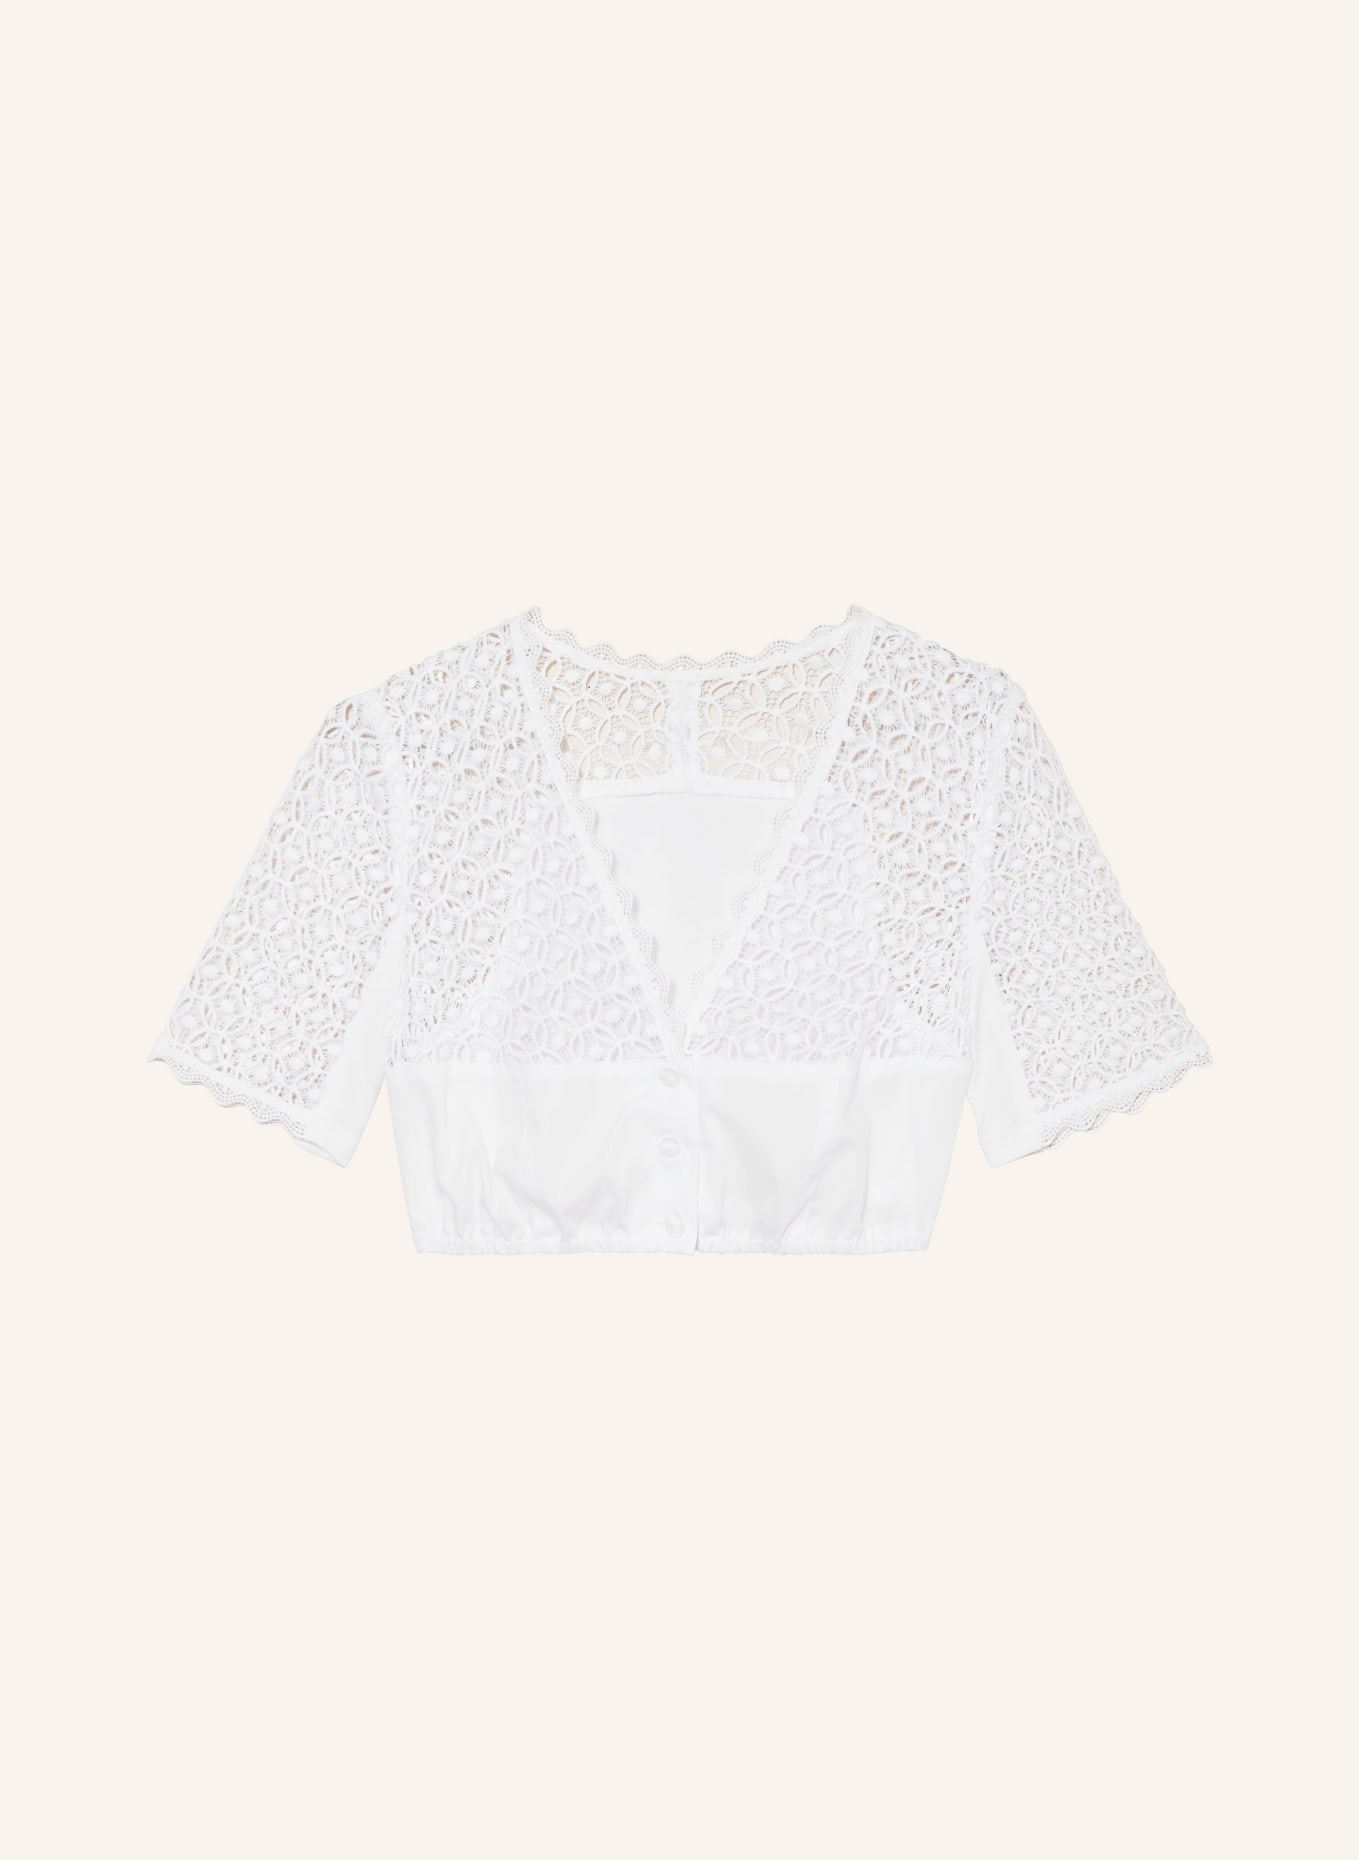 WALDORFF Dirndl blouse with crochet lace, Color: WHITE (Image 1)